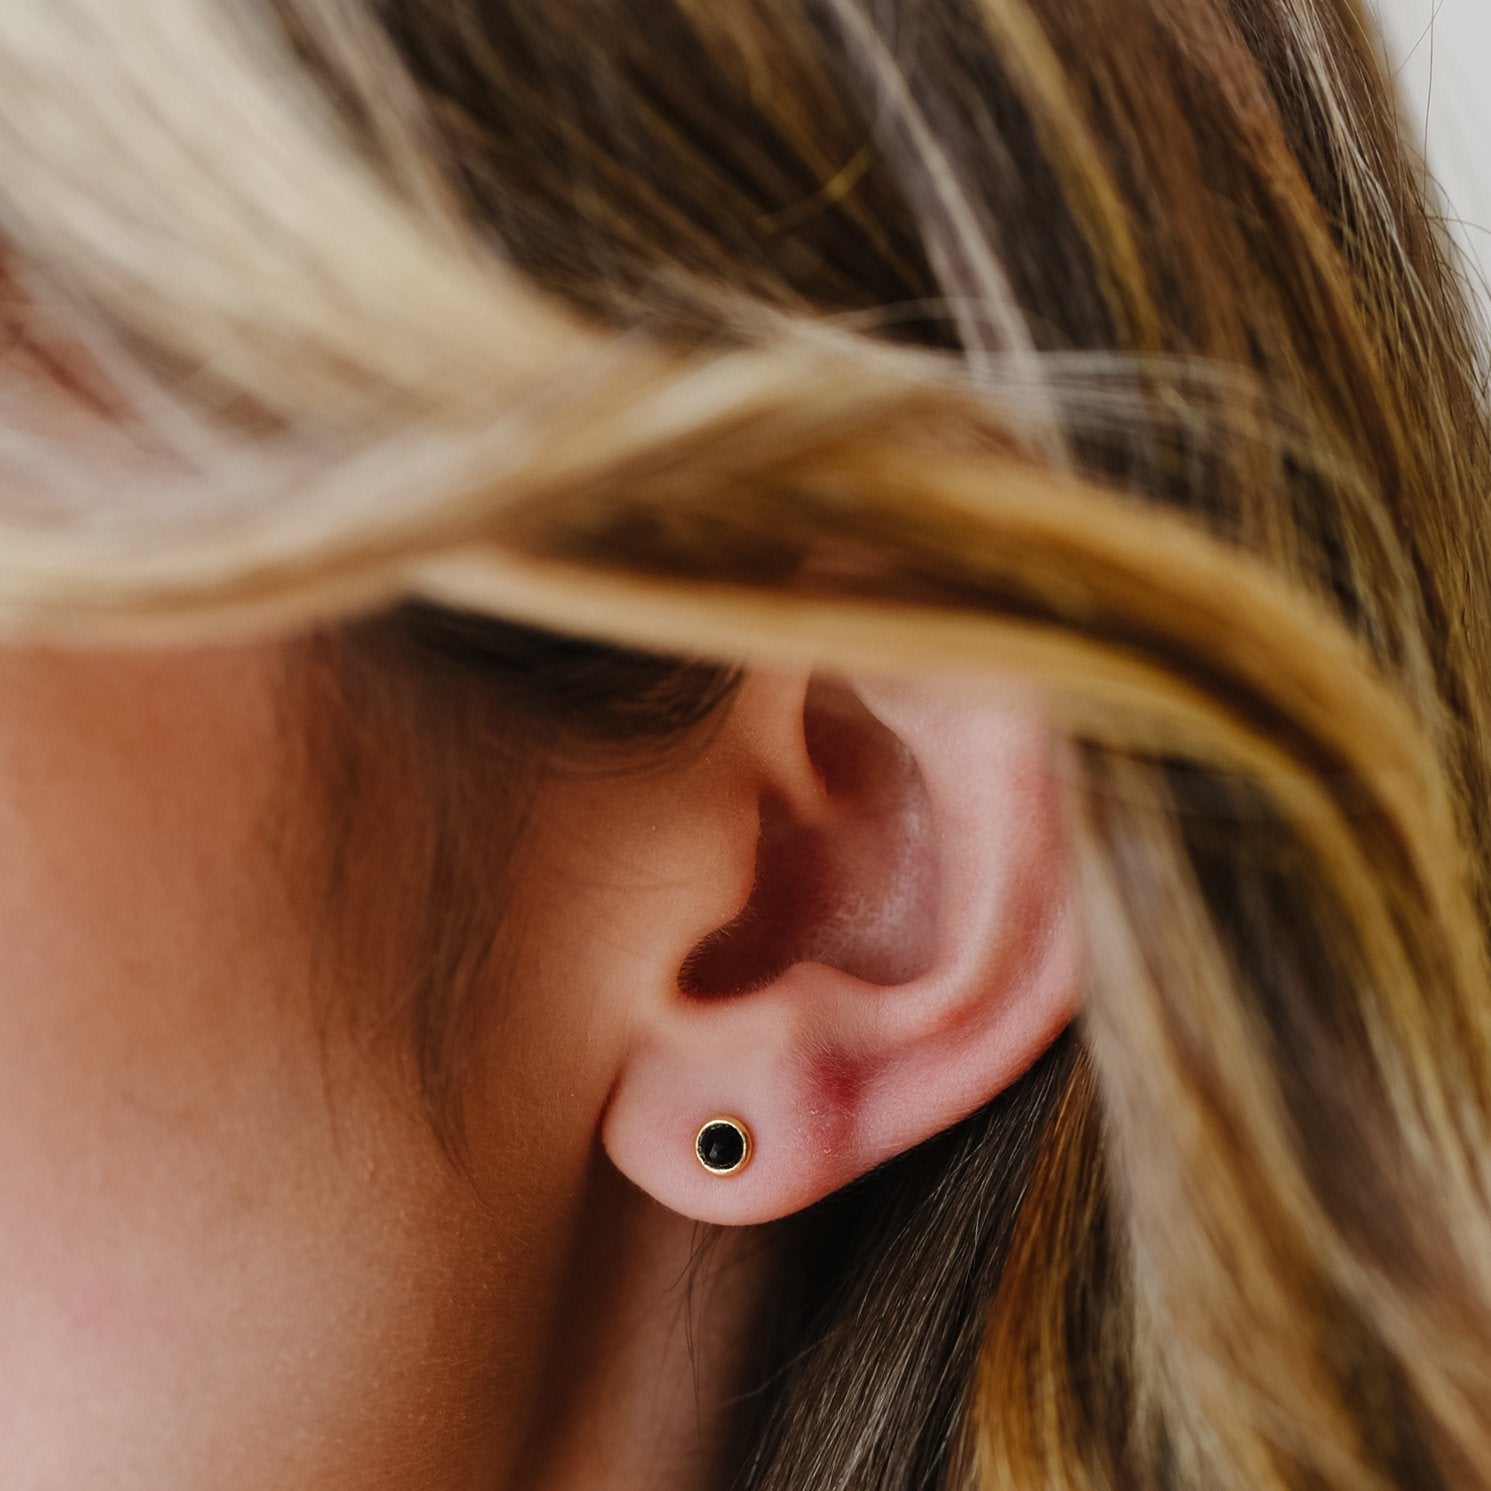 TINY PROTECT STUD EARRINGS - BLACK ONYX & GOLD - SO PRETTY CARA COTTER